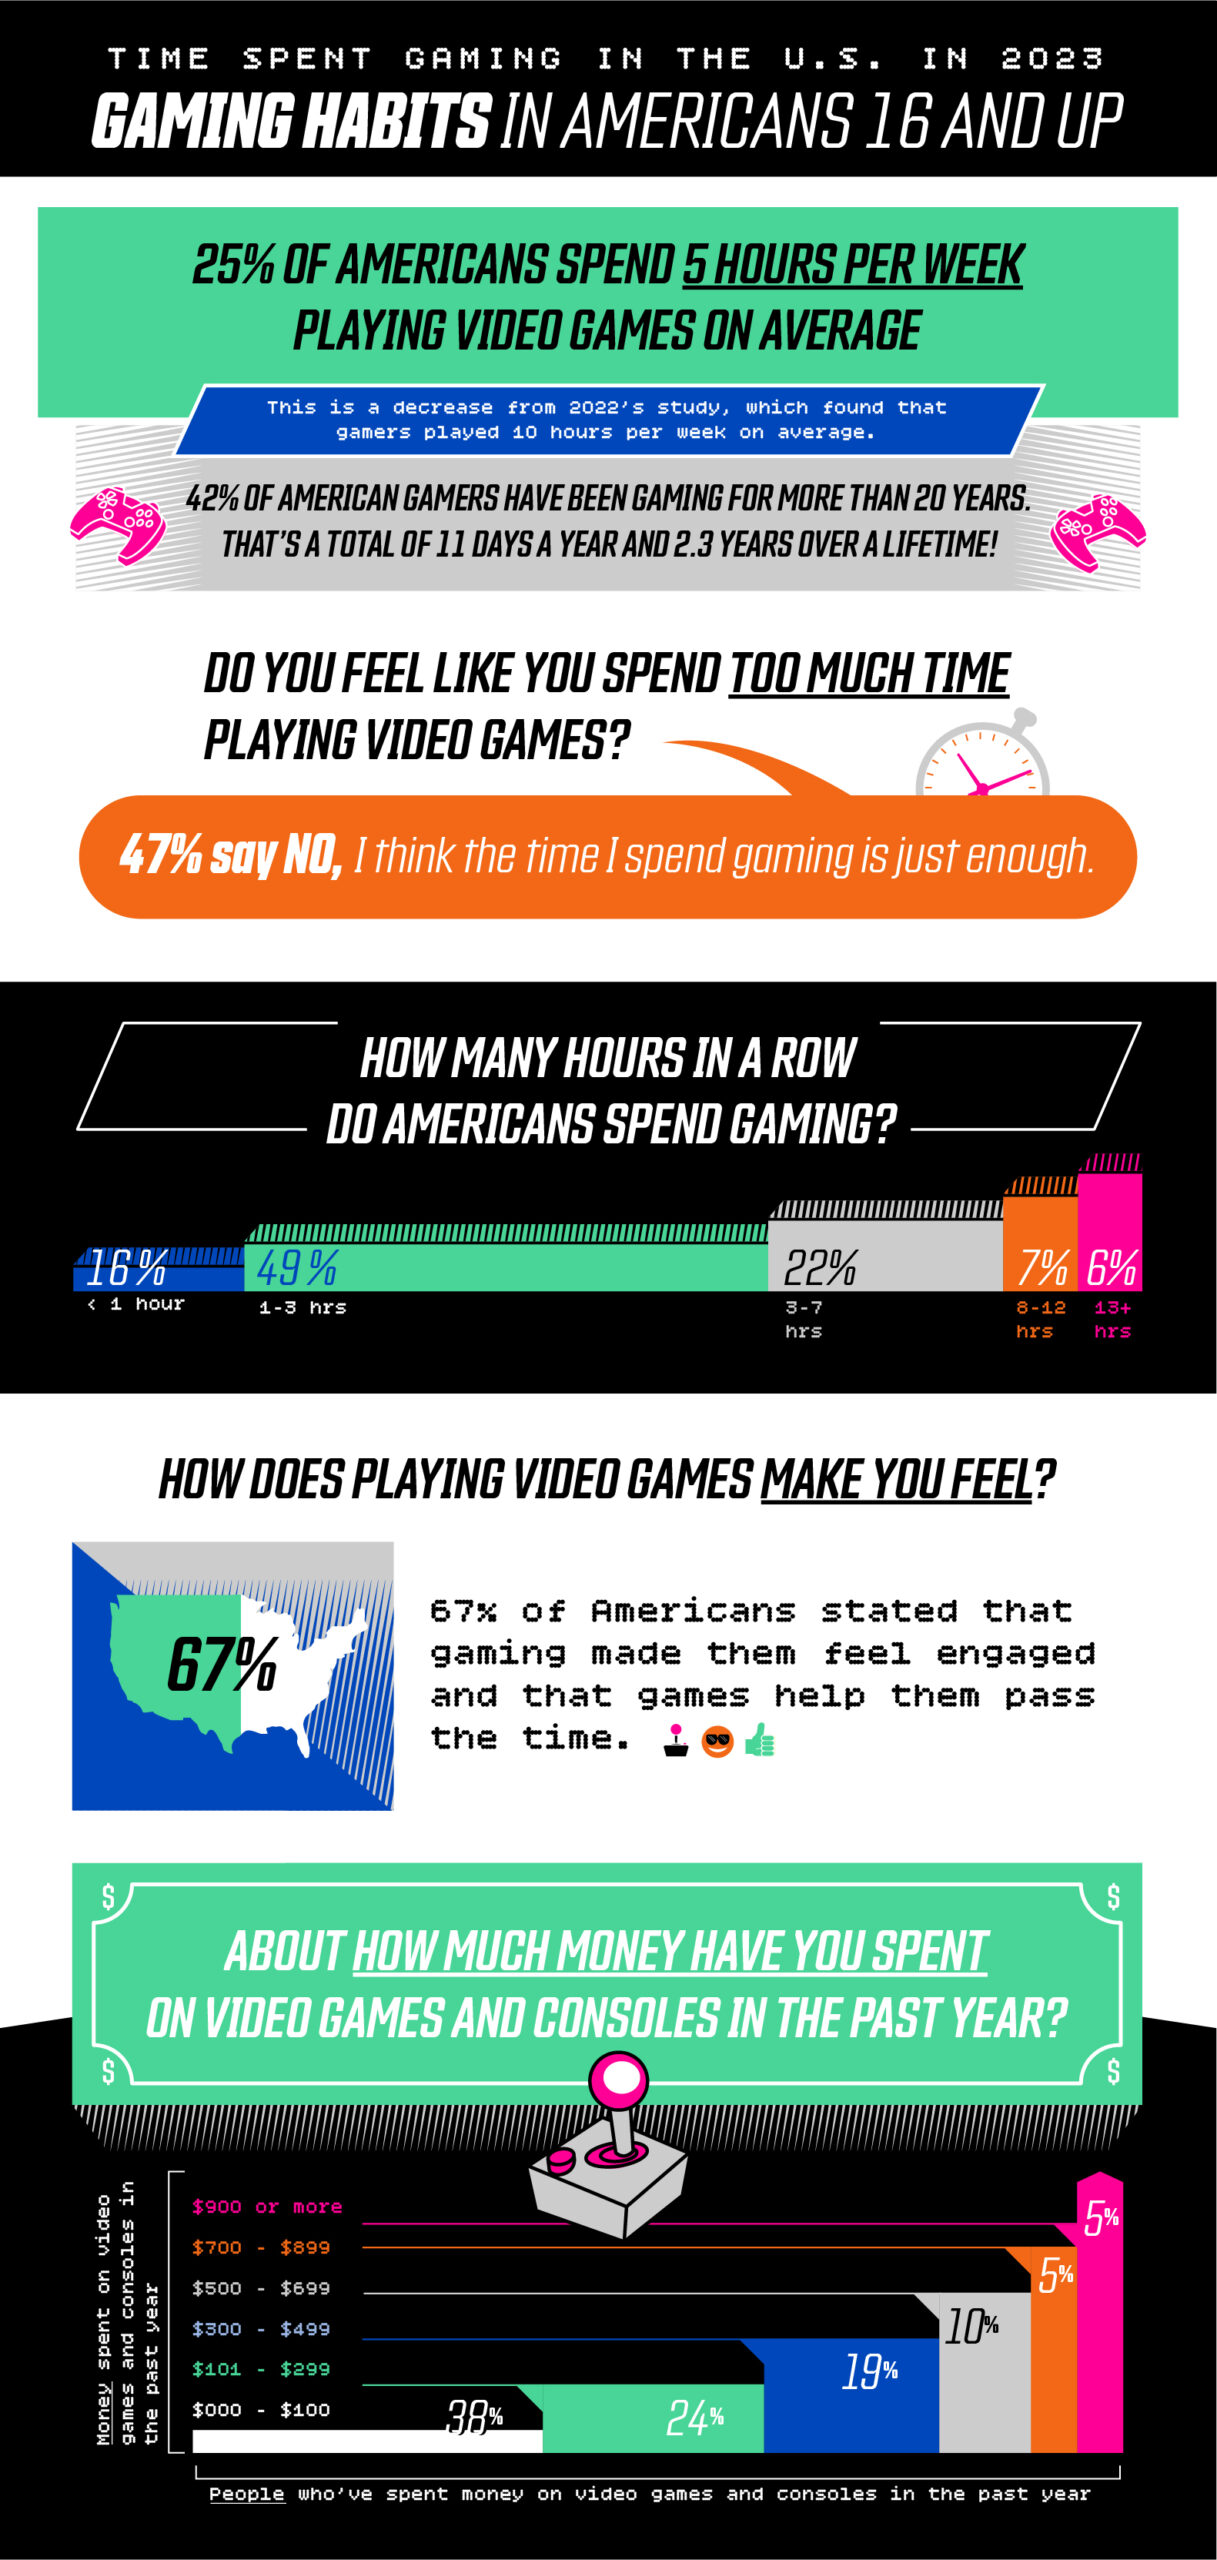 an infographic showing the gaming habits of Americans 16 and up